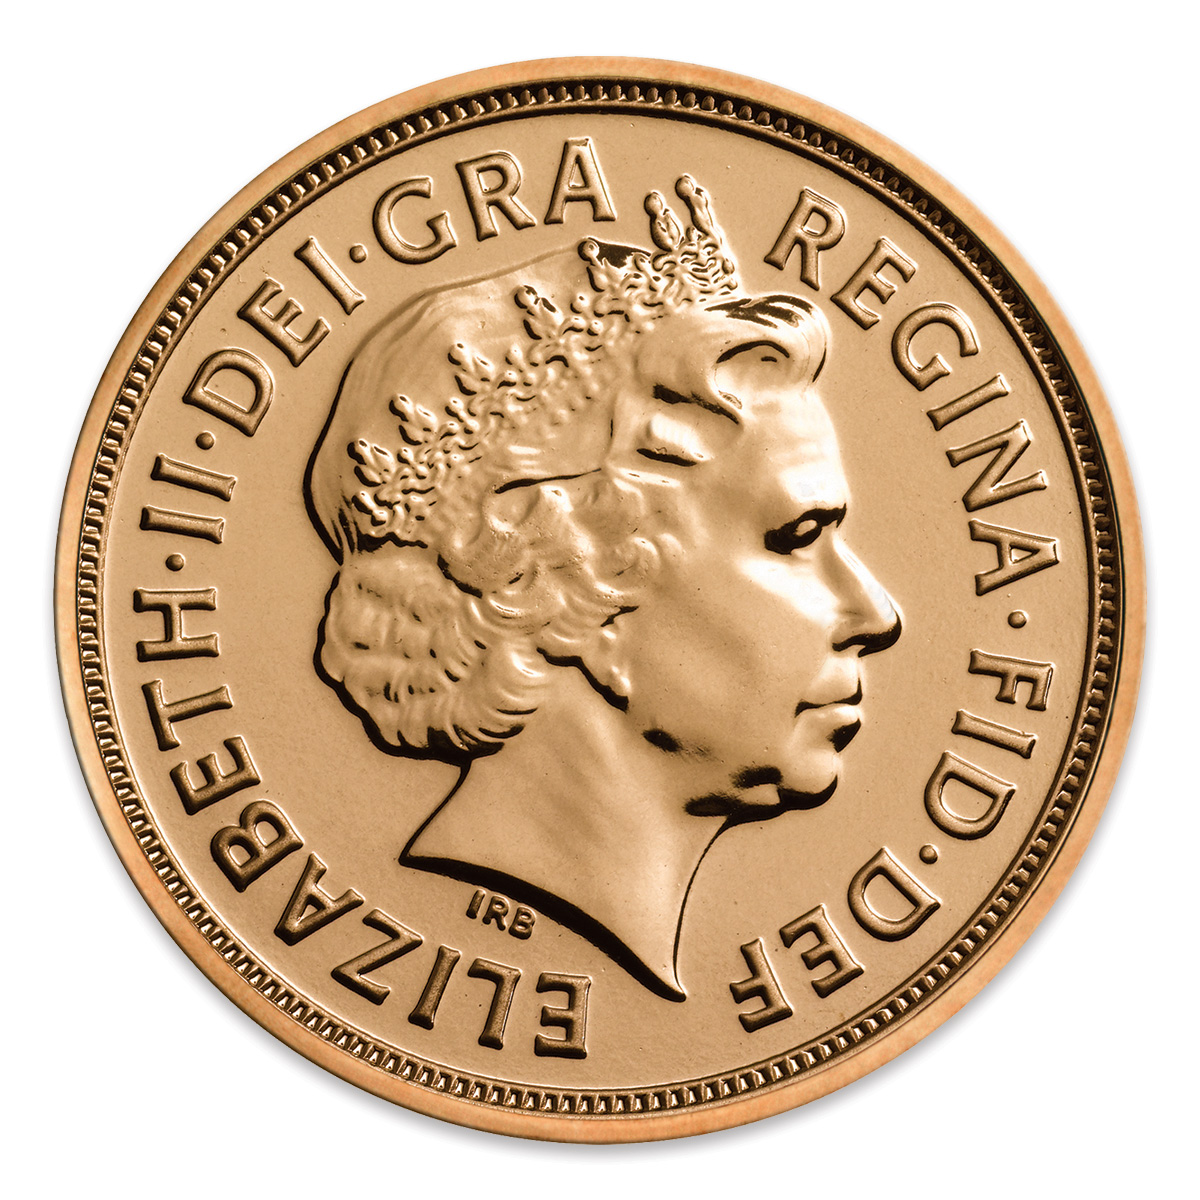 2014 Gold Full Sovereign Coin | The Royal Mint